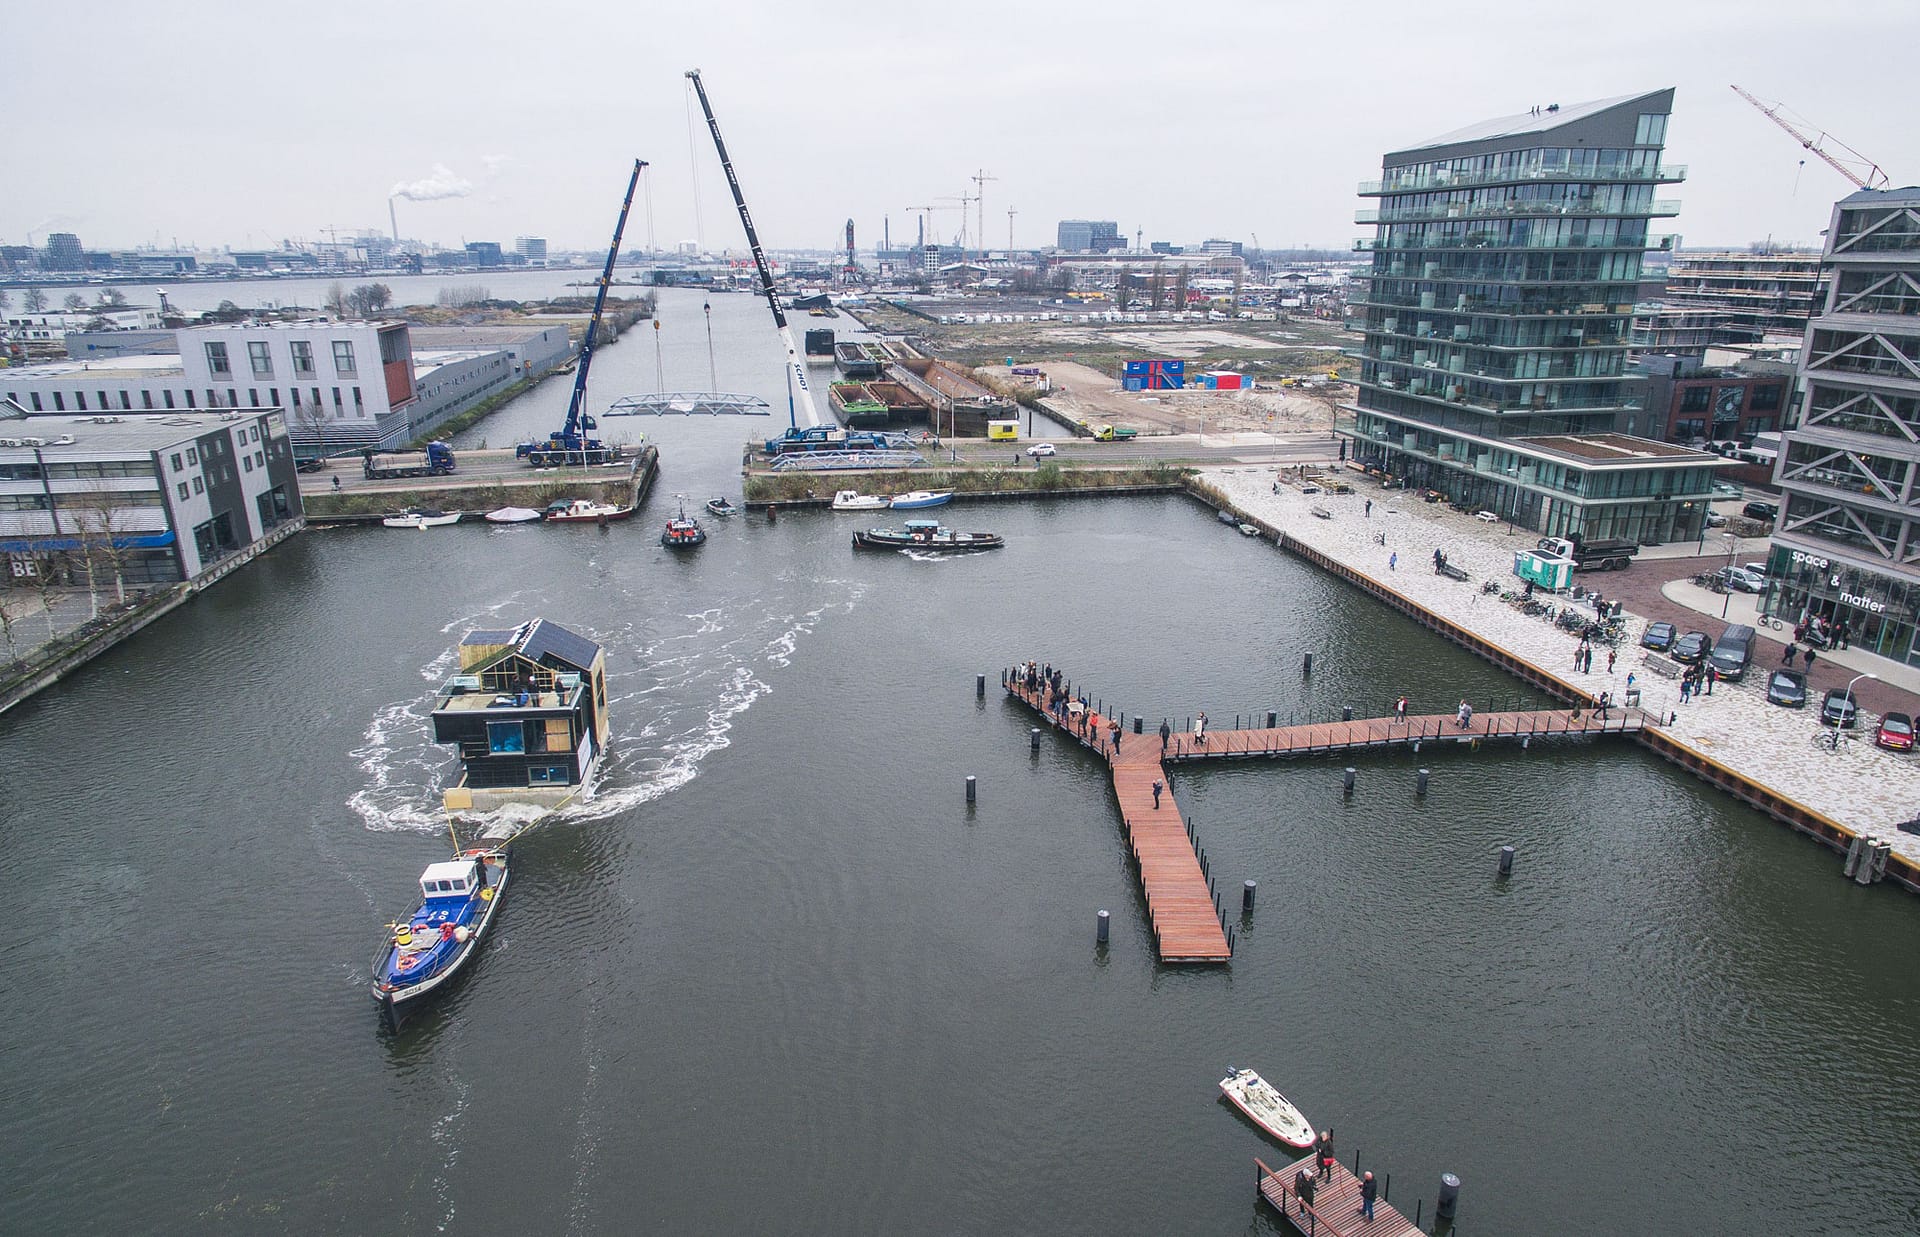 Residents have started moving in to what will be Europe’s most sustainable floating community: Schoonschip